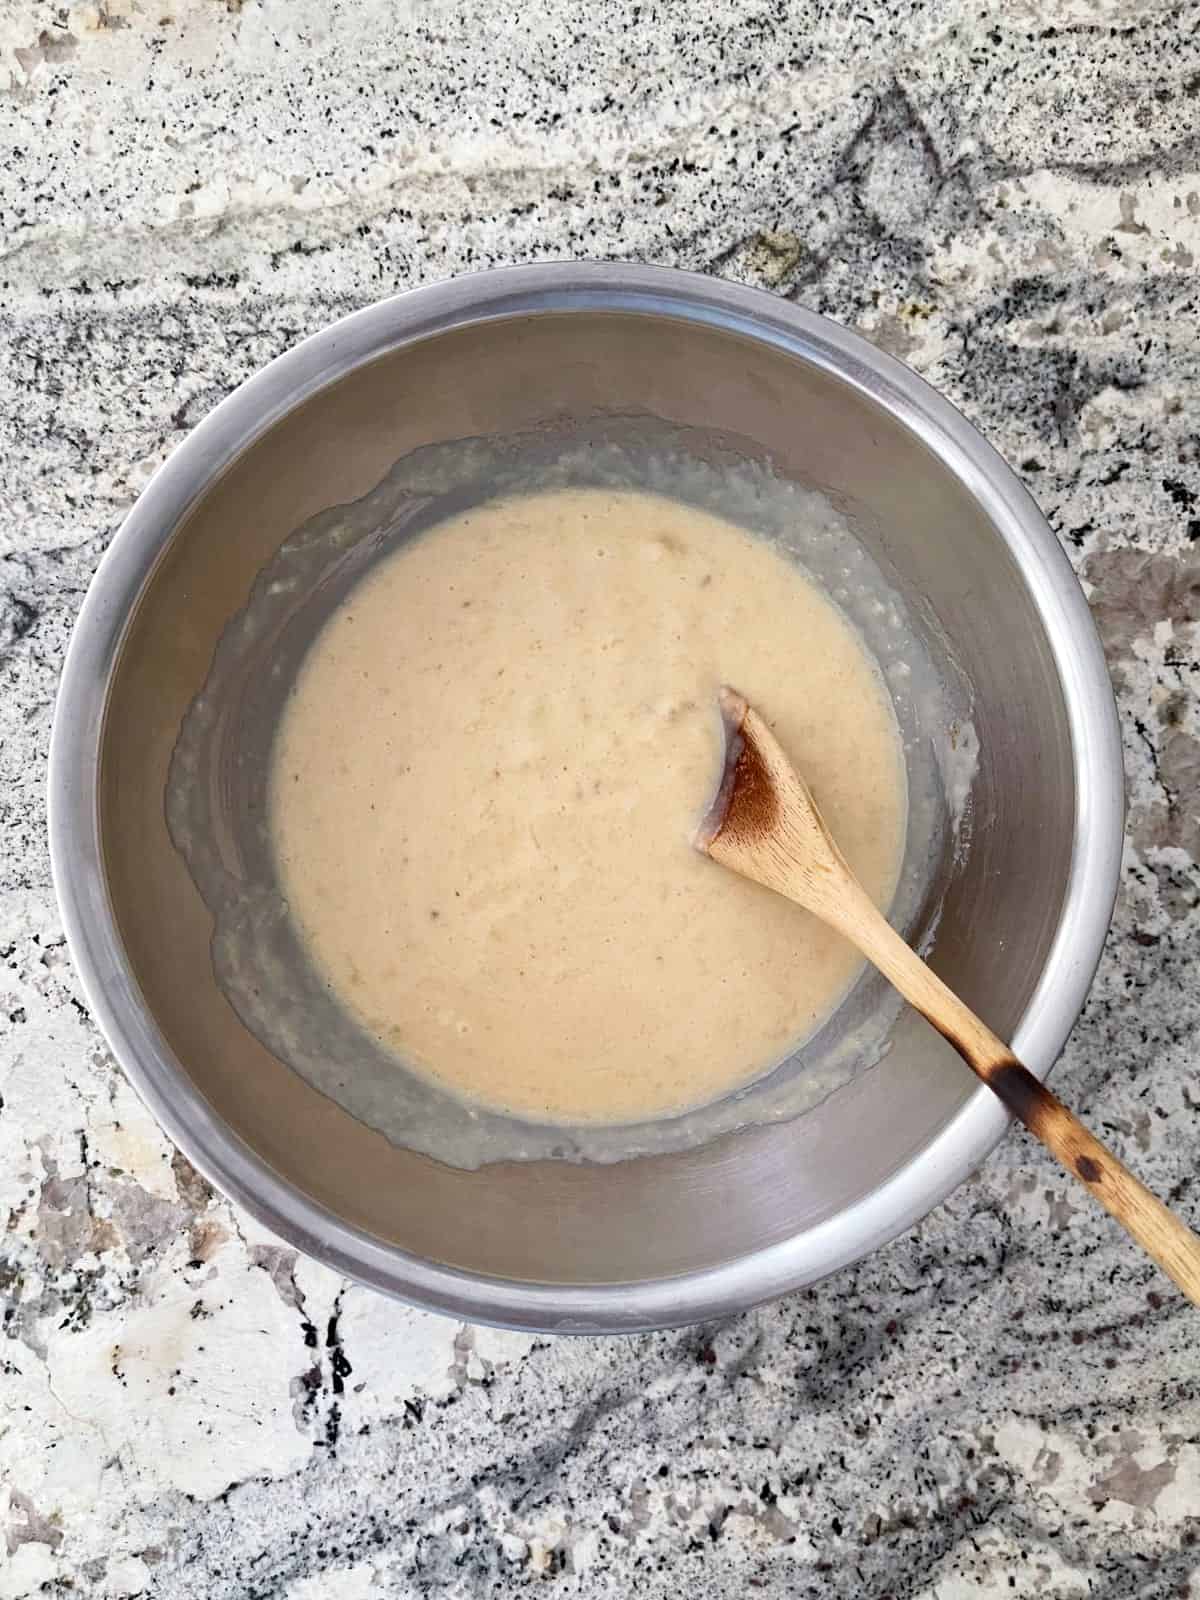 Mixing butter, sweetener, egg, vanilla, yogurt and mashed banana in mixing bowl with wooden spoon.